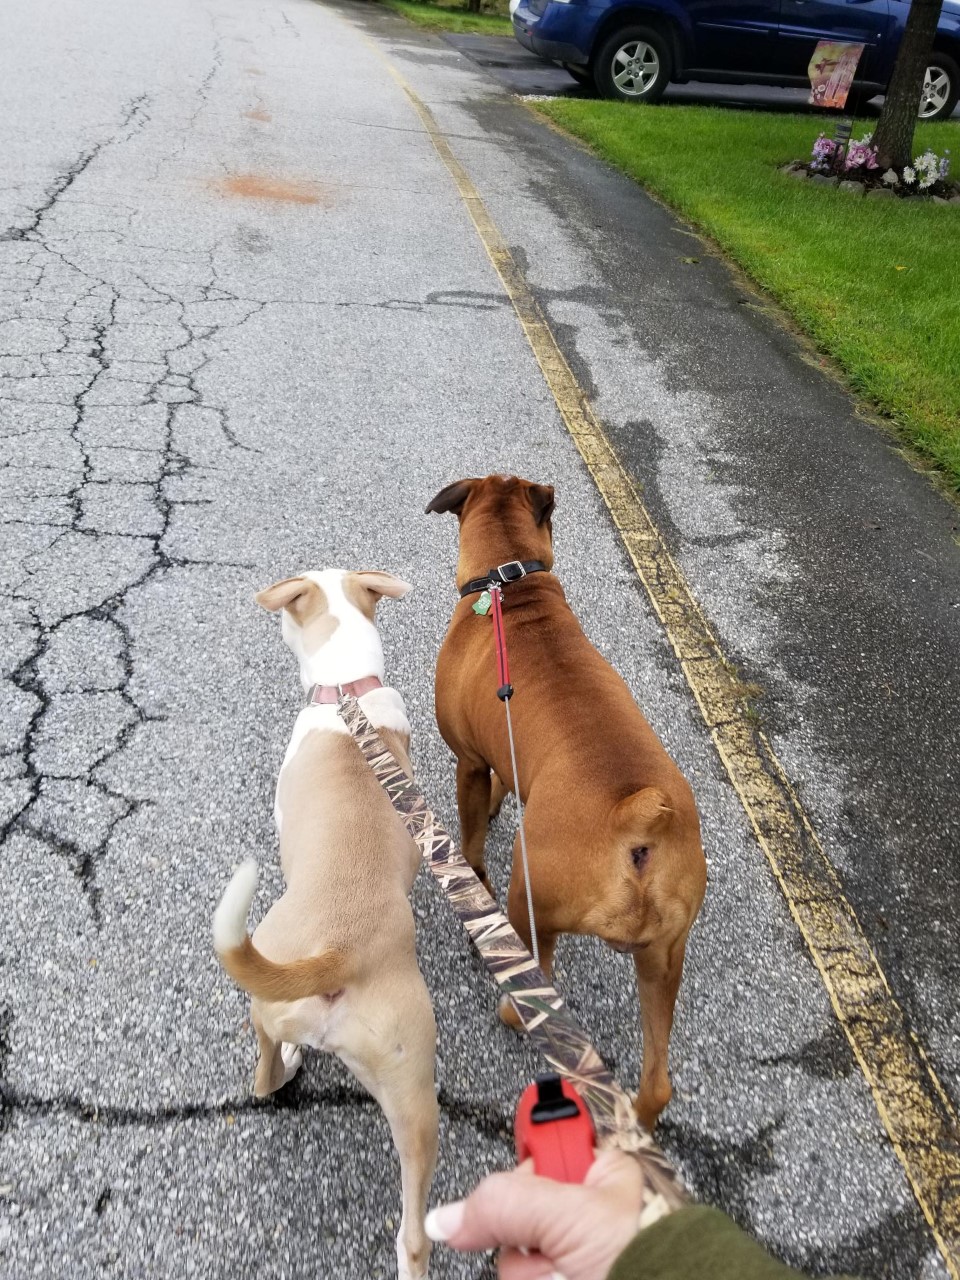 Our first walk together